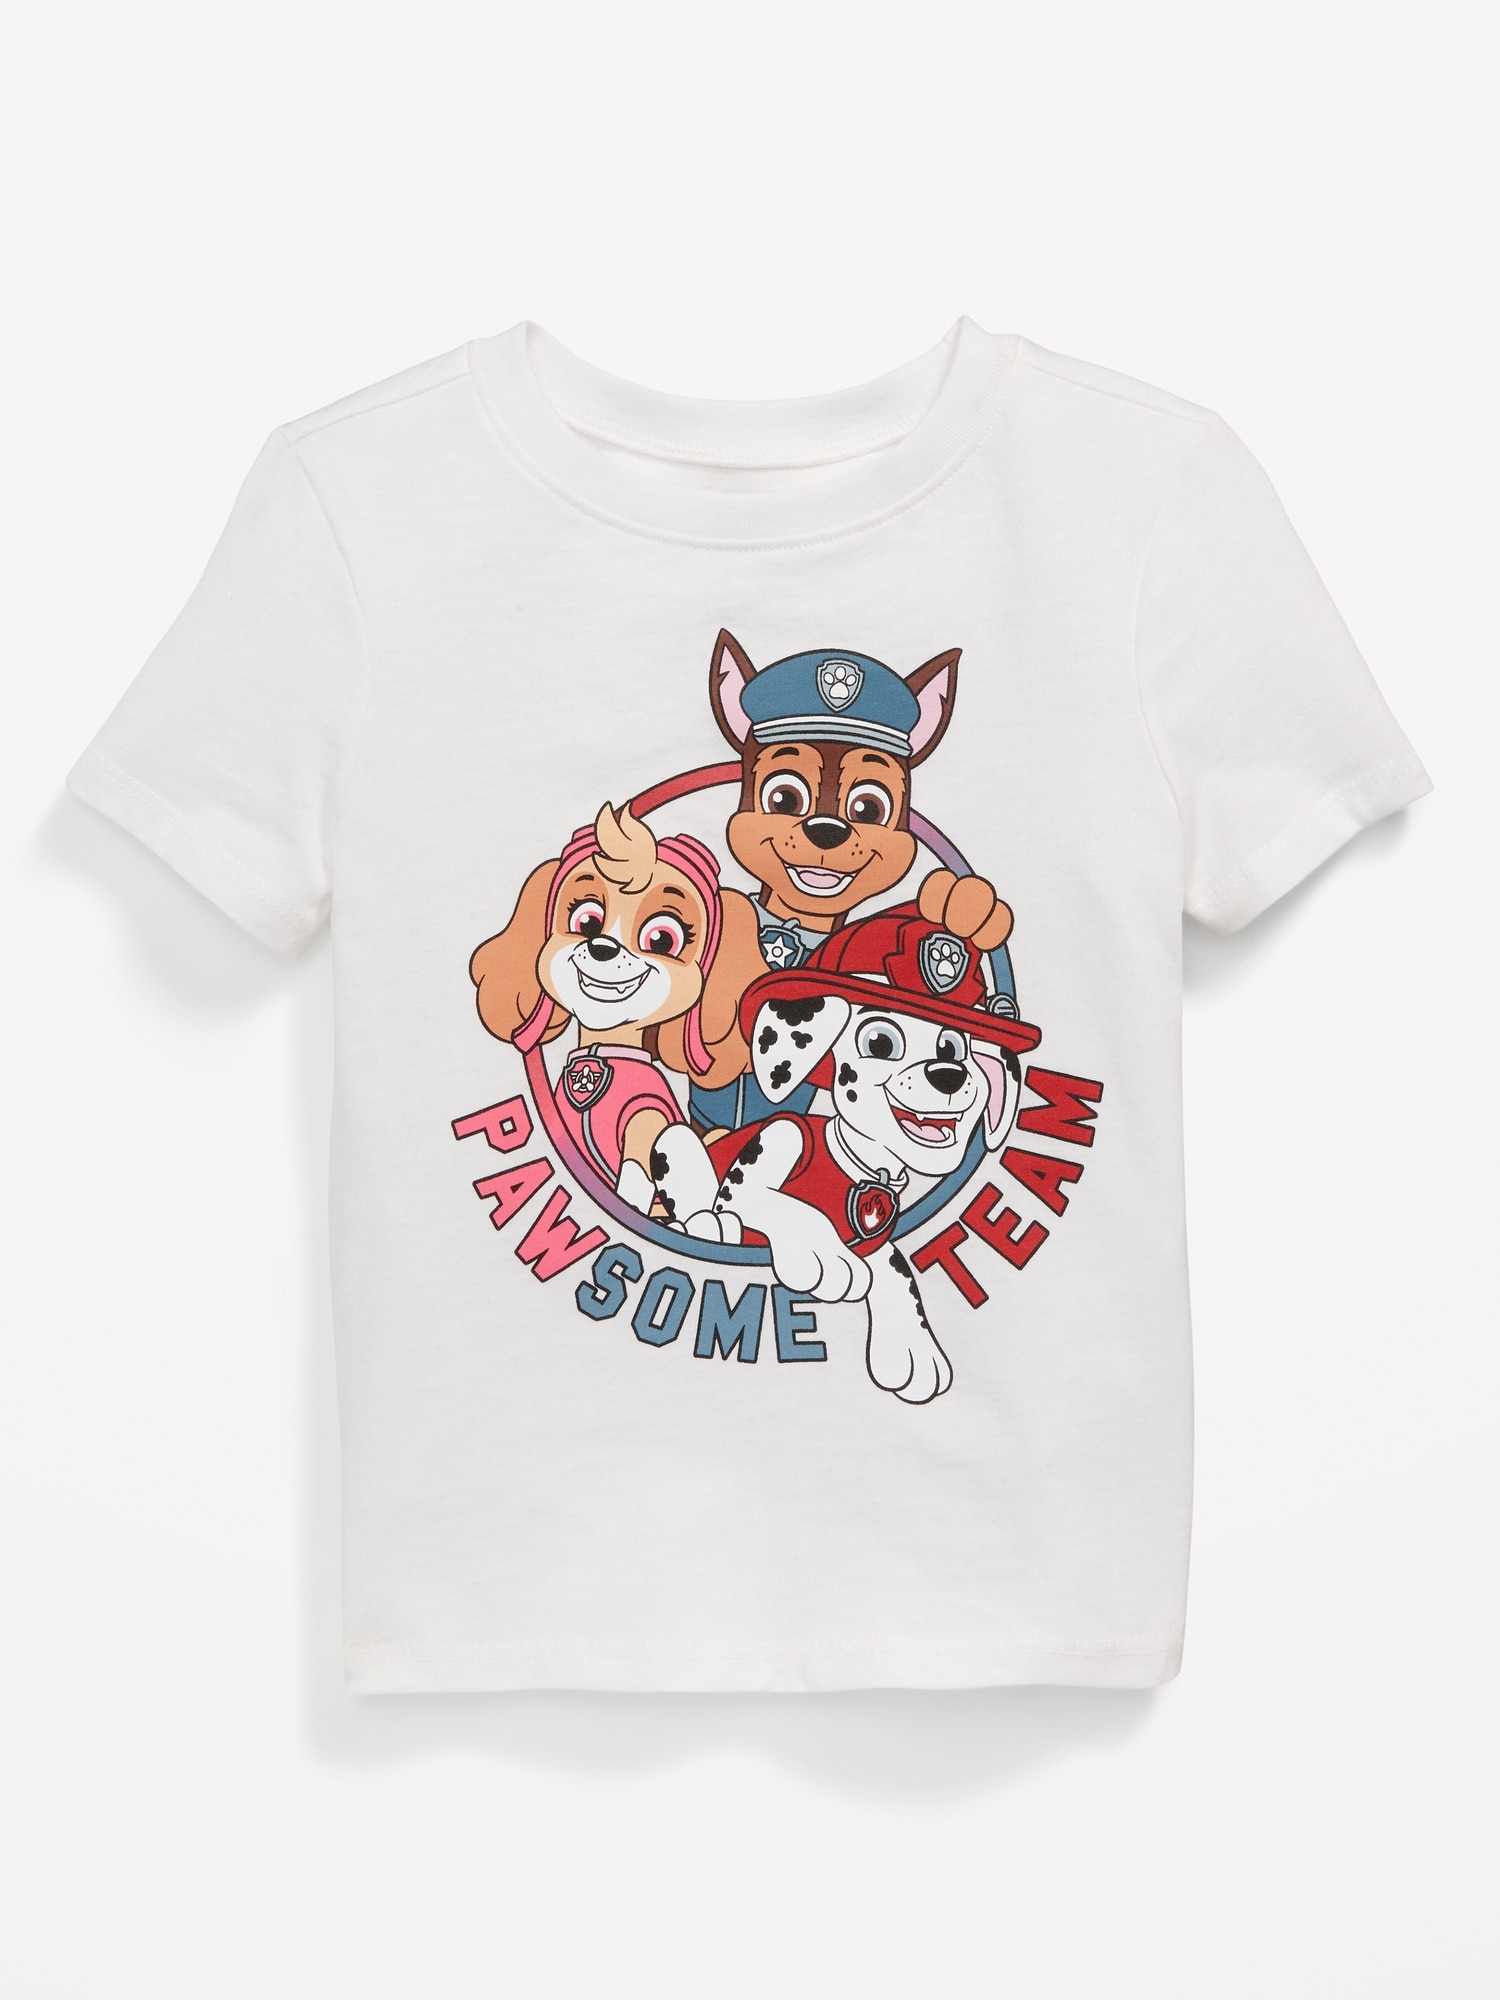 Paw Patrol Unisex Graphic T-Shirt for Toddler Hot Deal